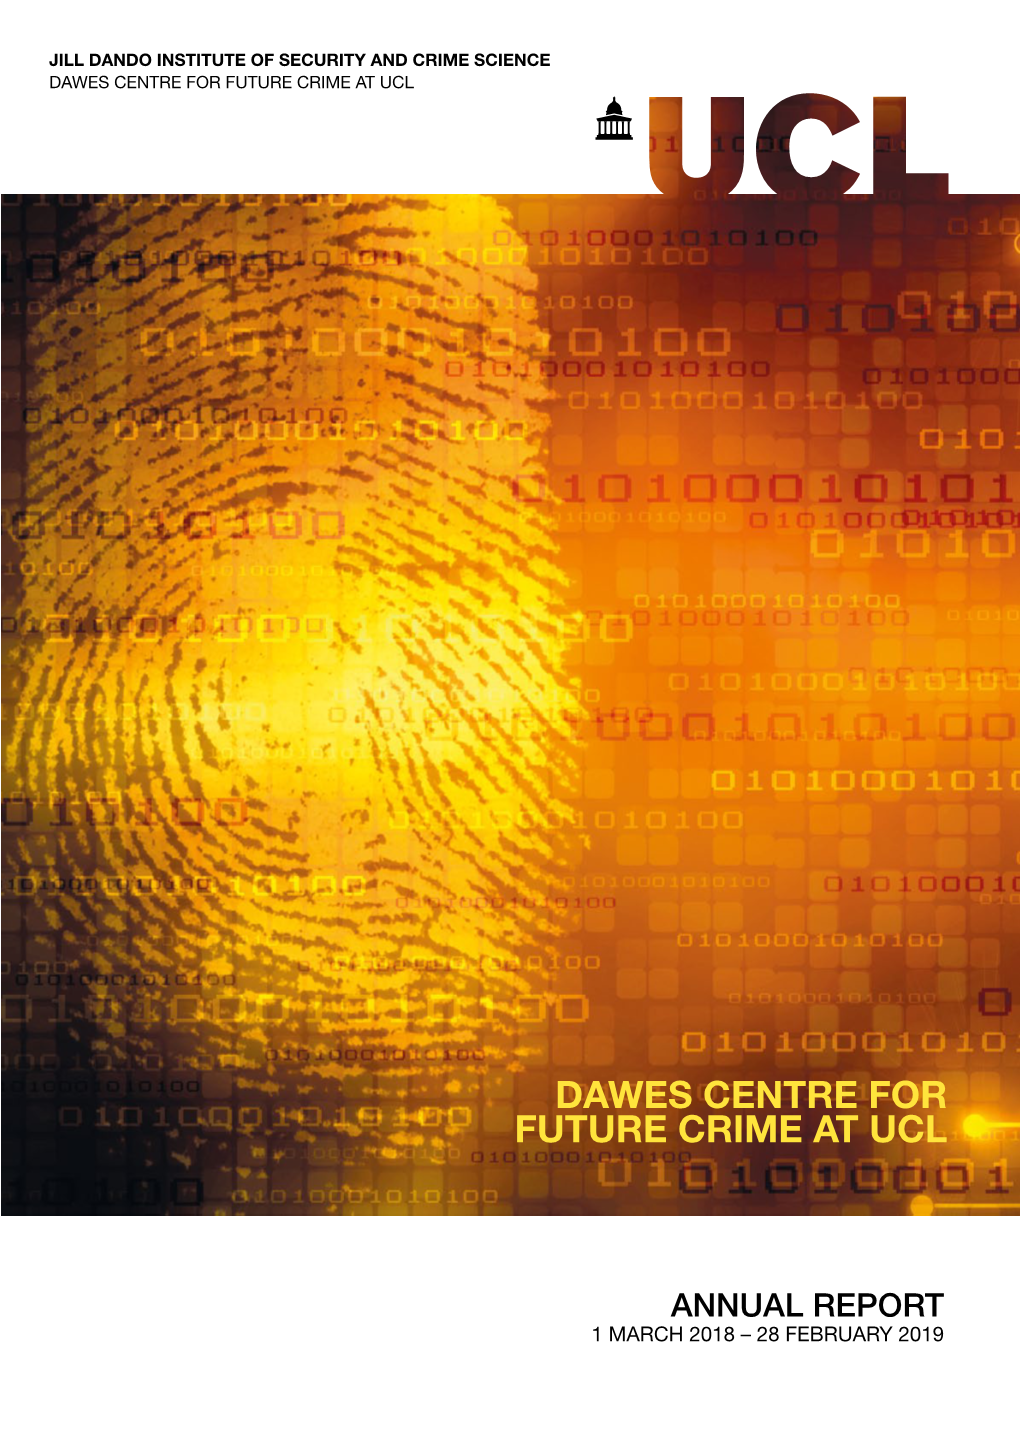 Dawes Centre for Future Crime at Ucl